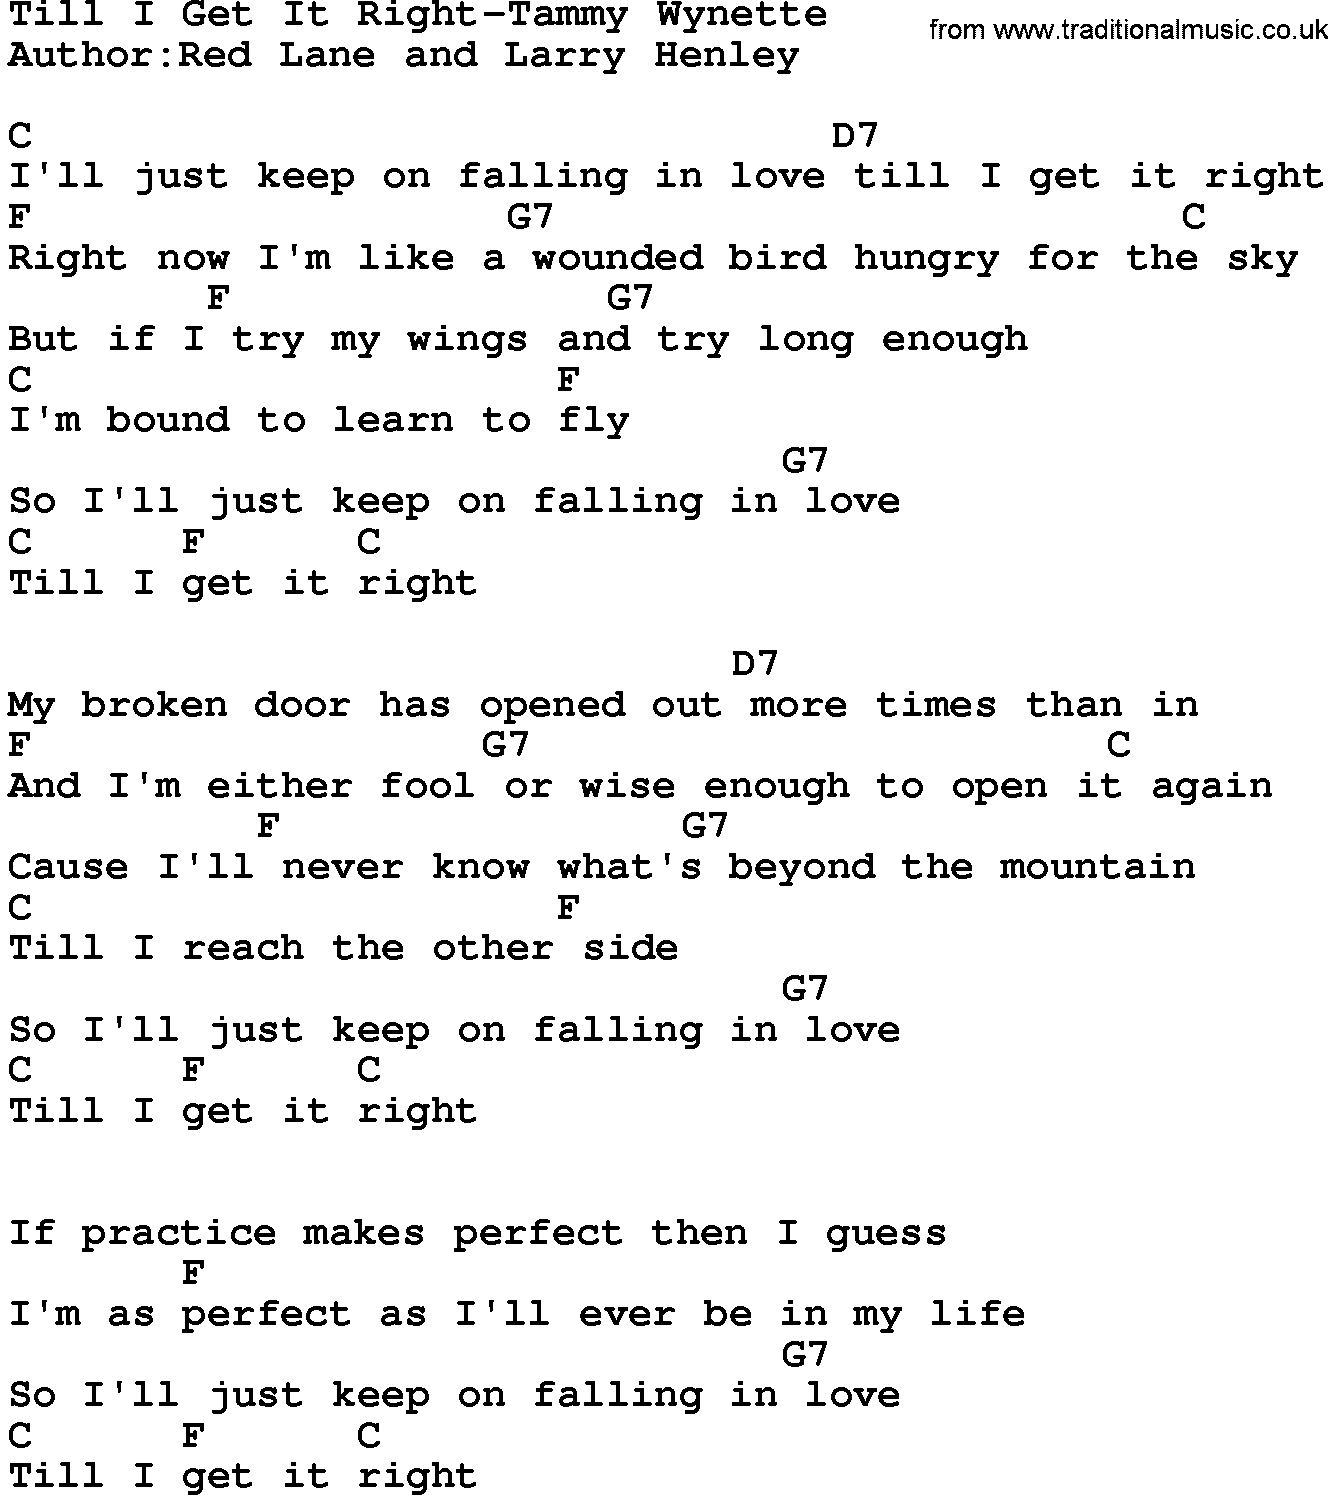 Country music song: Till I Get It Right-Tammy Wynette lyrics and chords